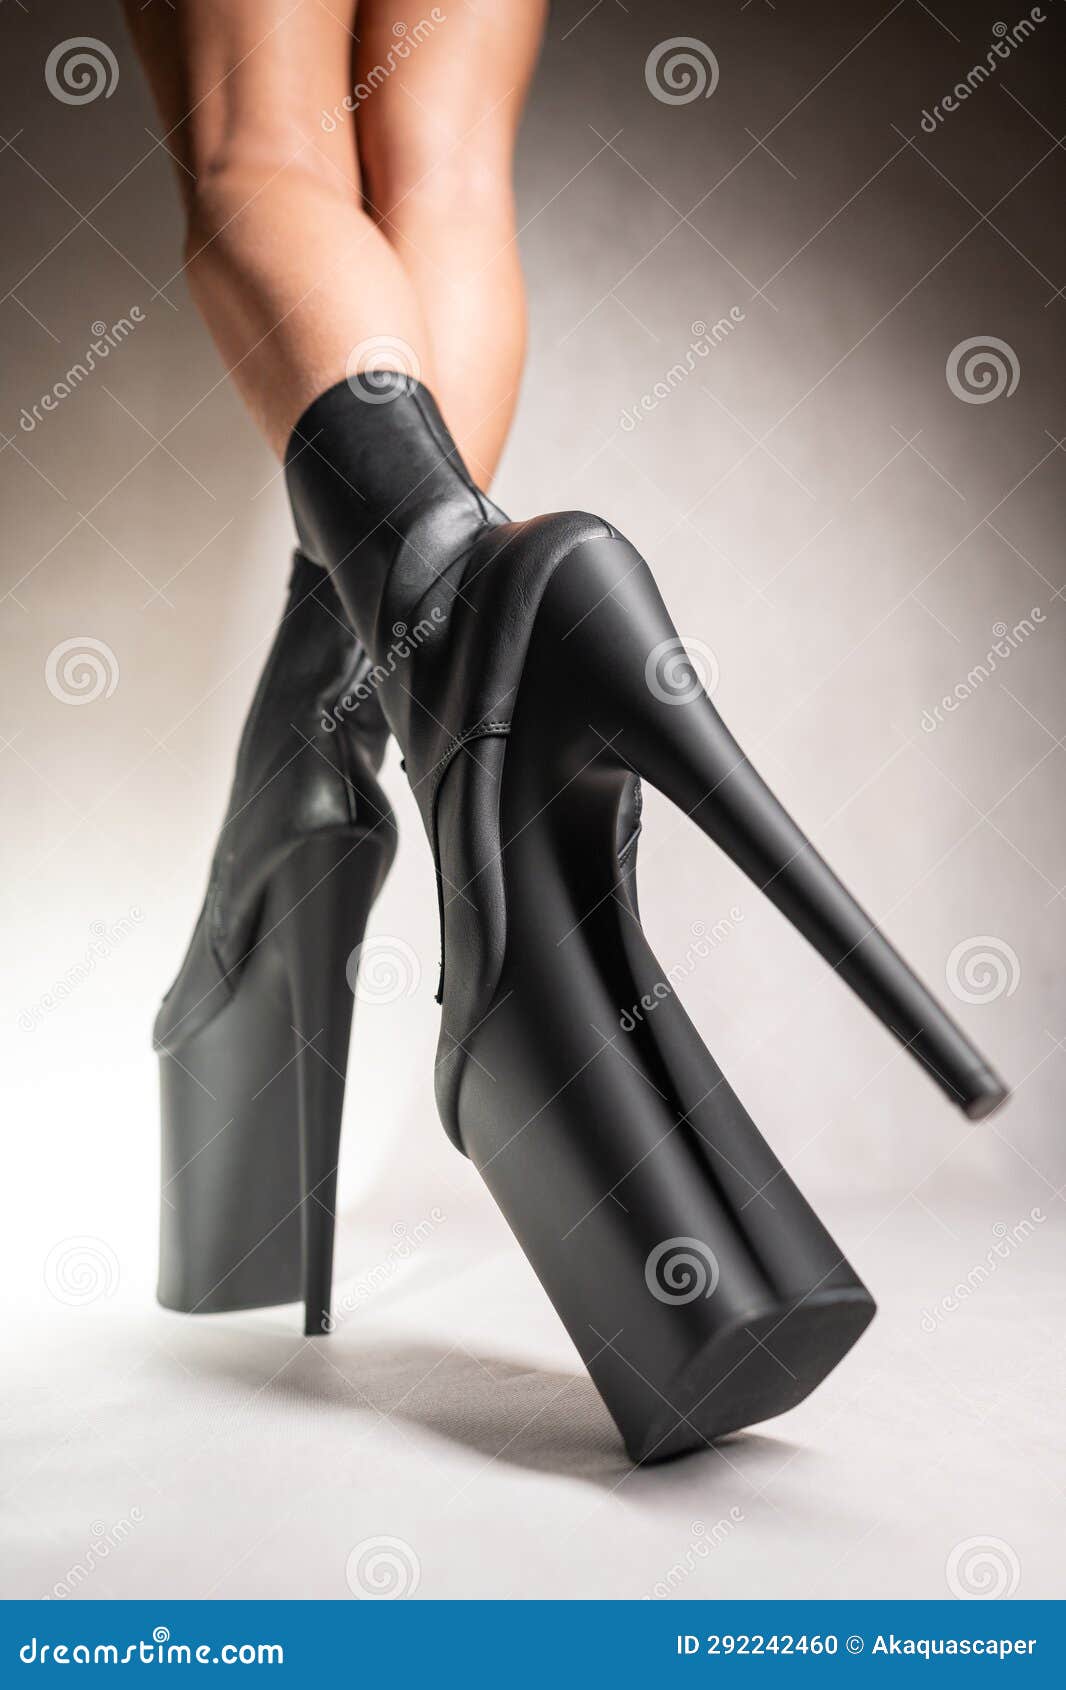 130 Pole Dancer Shoes Stock Photos - Free & Royalty-Free Stock Photos from  Dreamstime